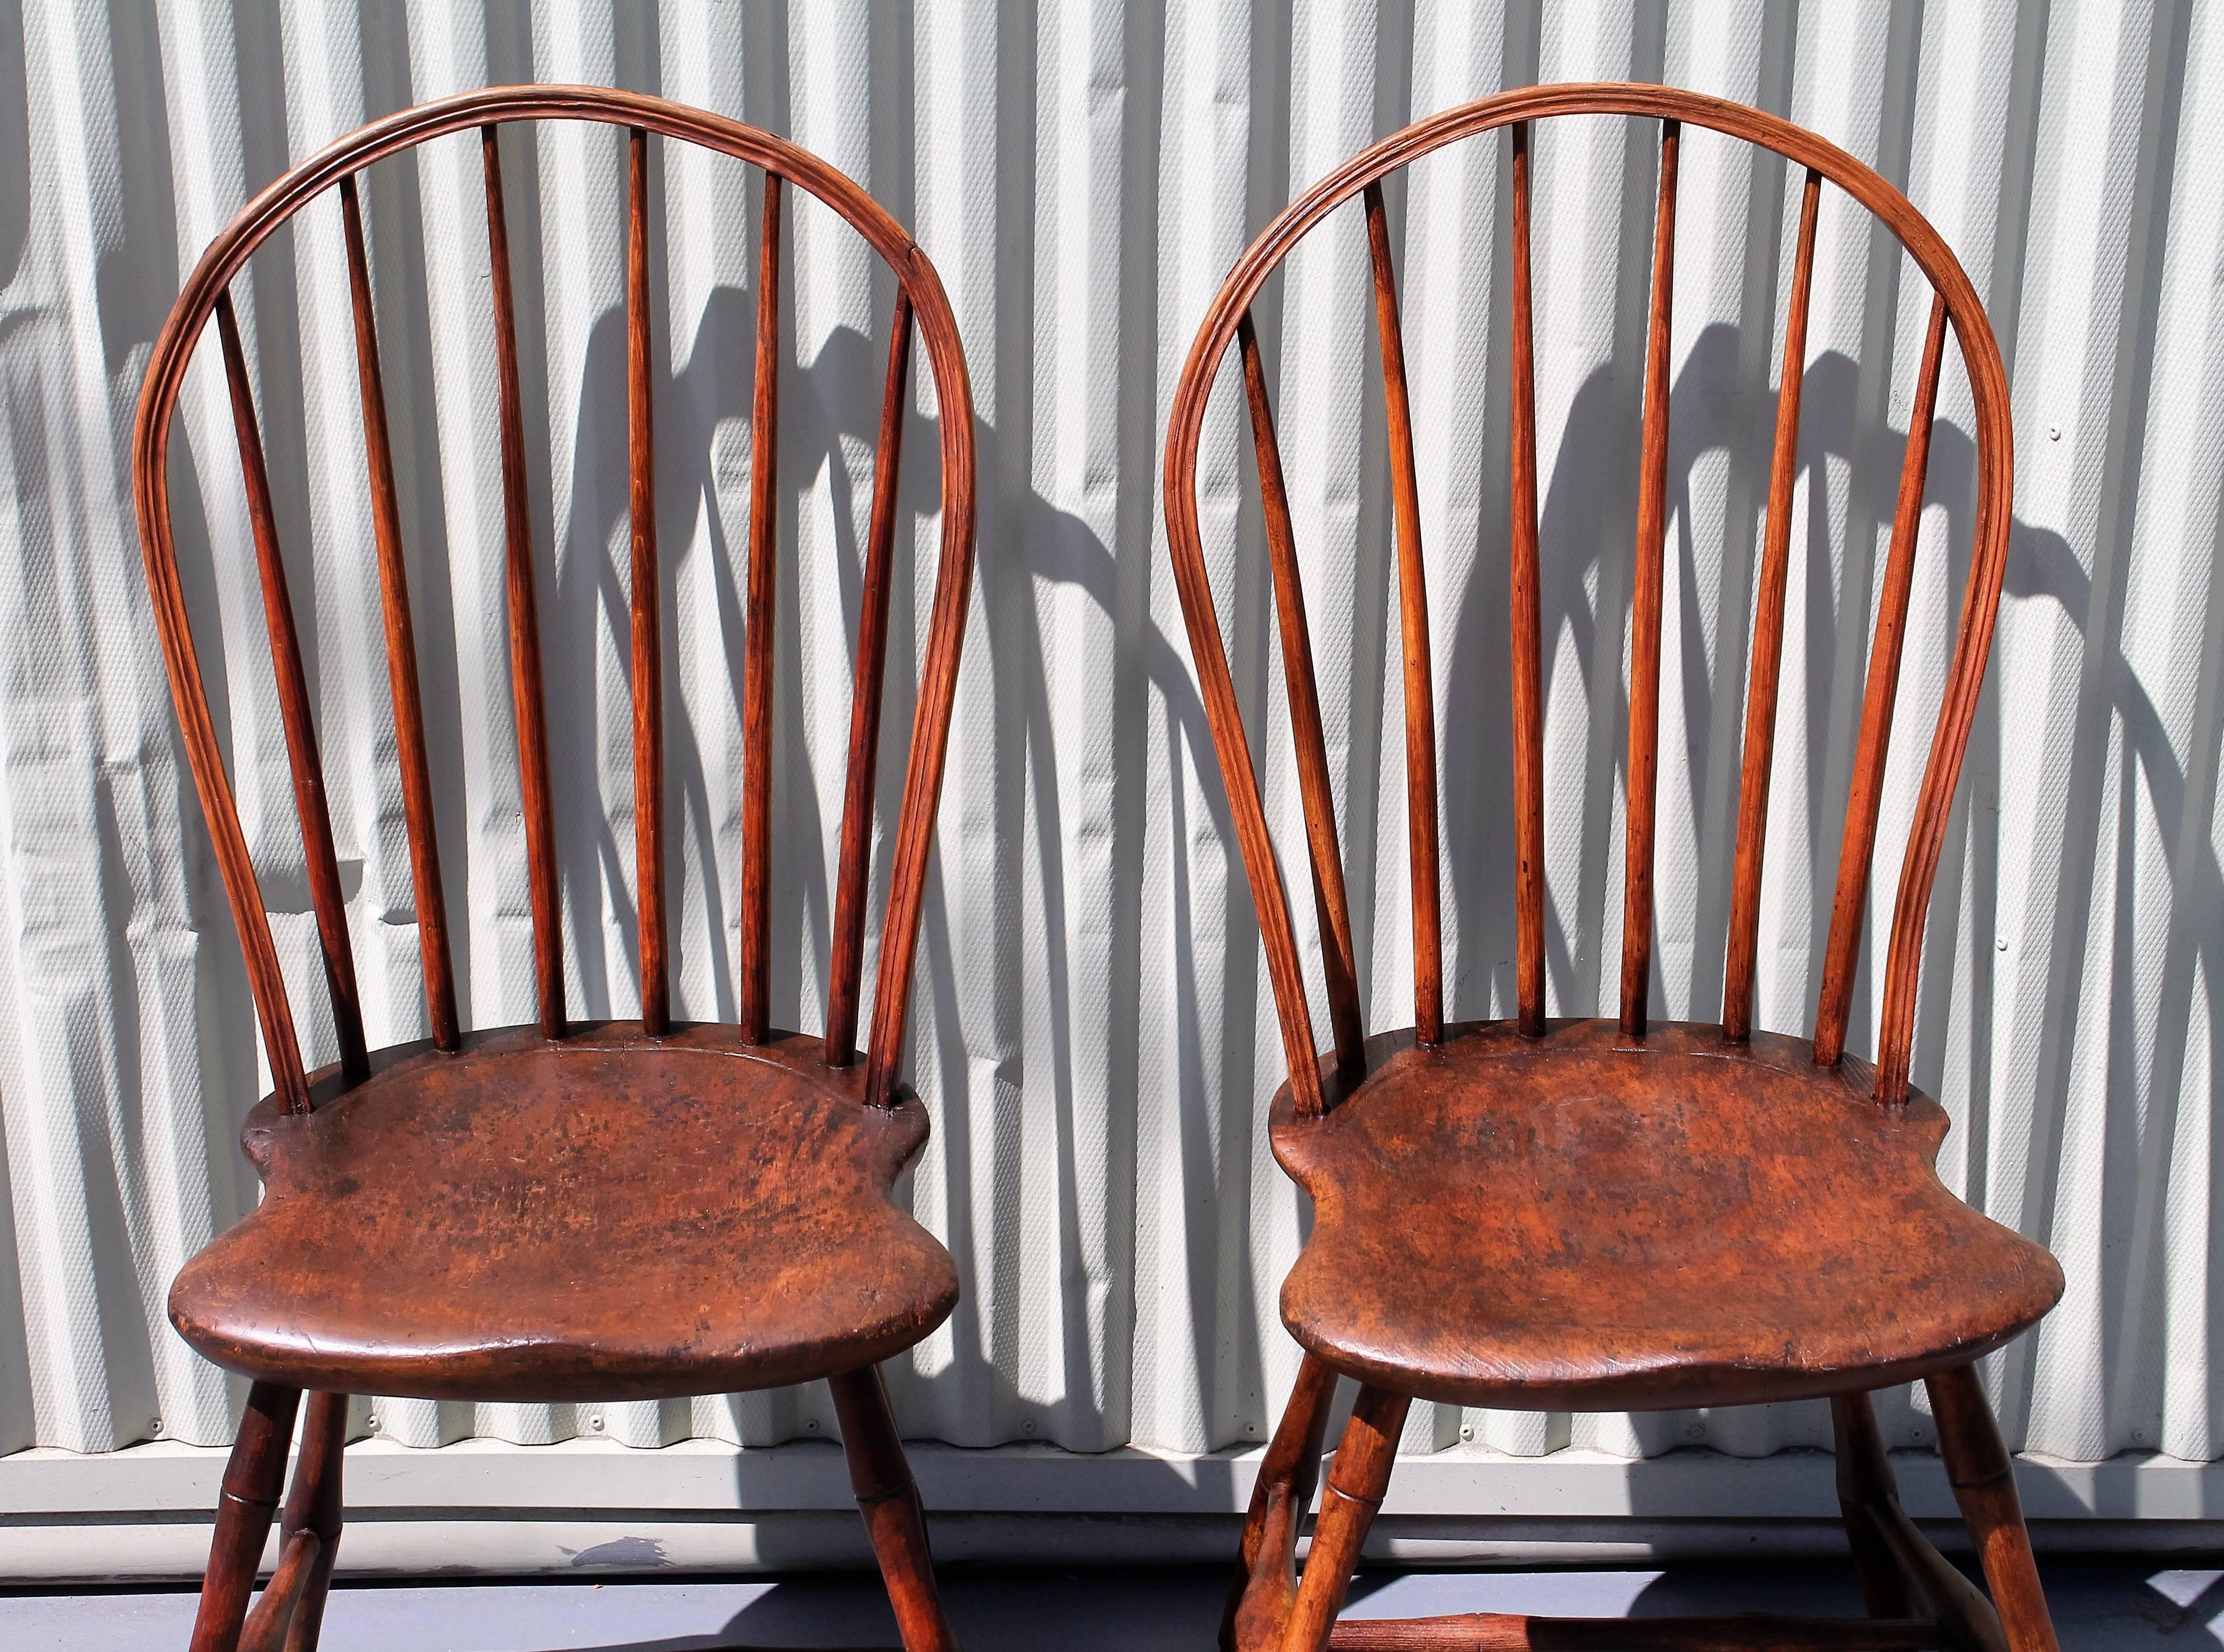 These amazing early windsor chairs are in fine, sturdy condition. The surface is old and worn with a over finish and the wear is consistent with age and use. The saddle seats make the chairs super comfortable. Sold as a pair only.